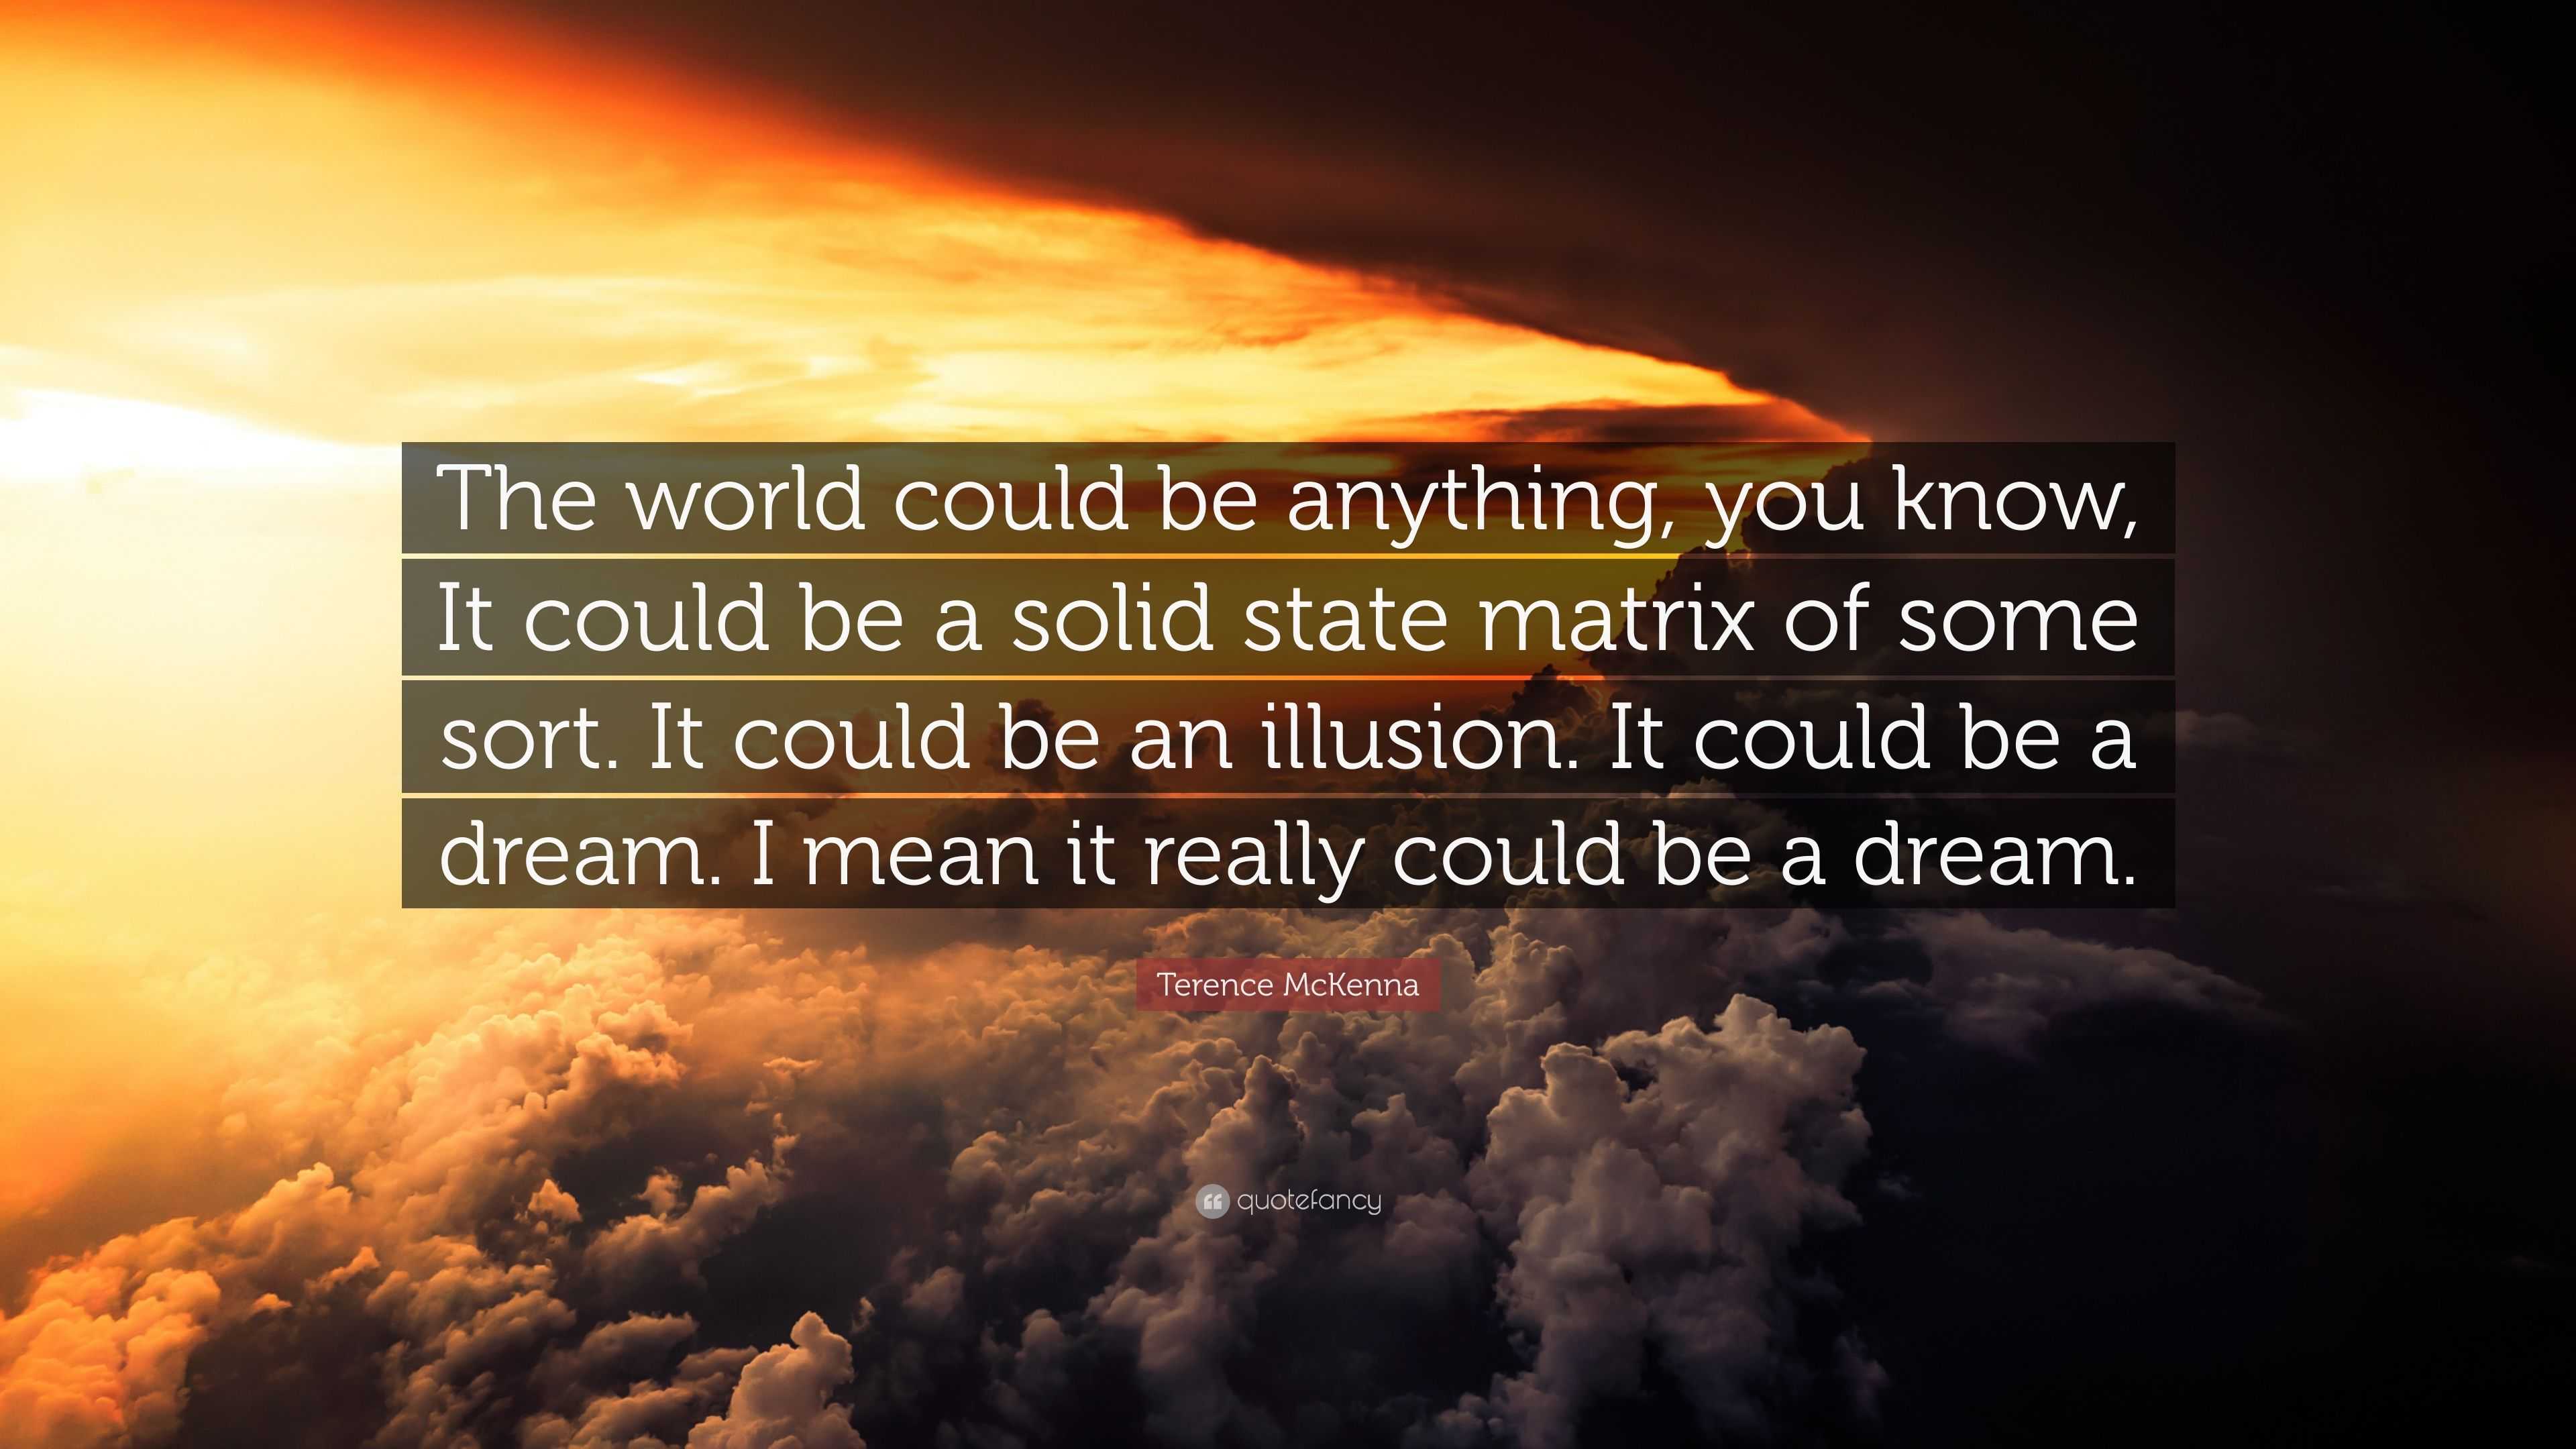 Terence McKenna Quote: “The world could be anything, you know, It could ...